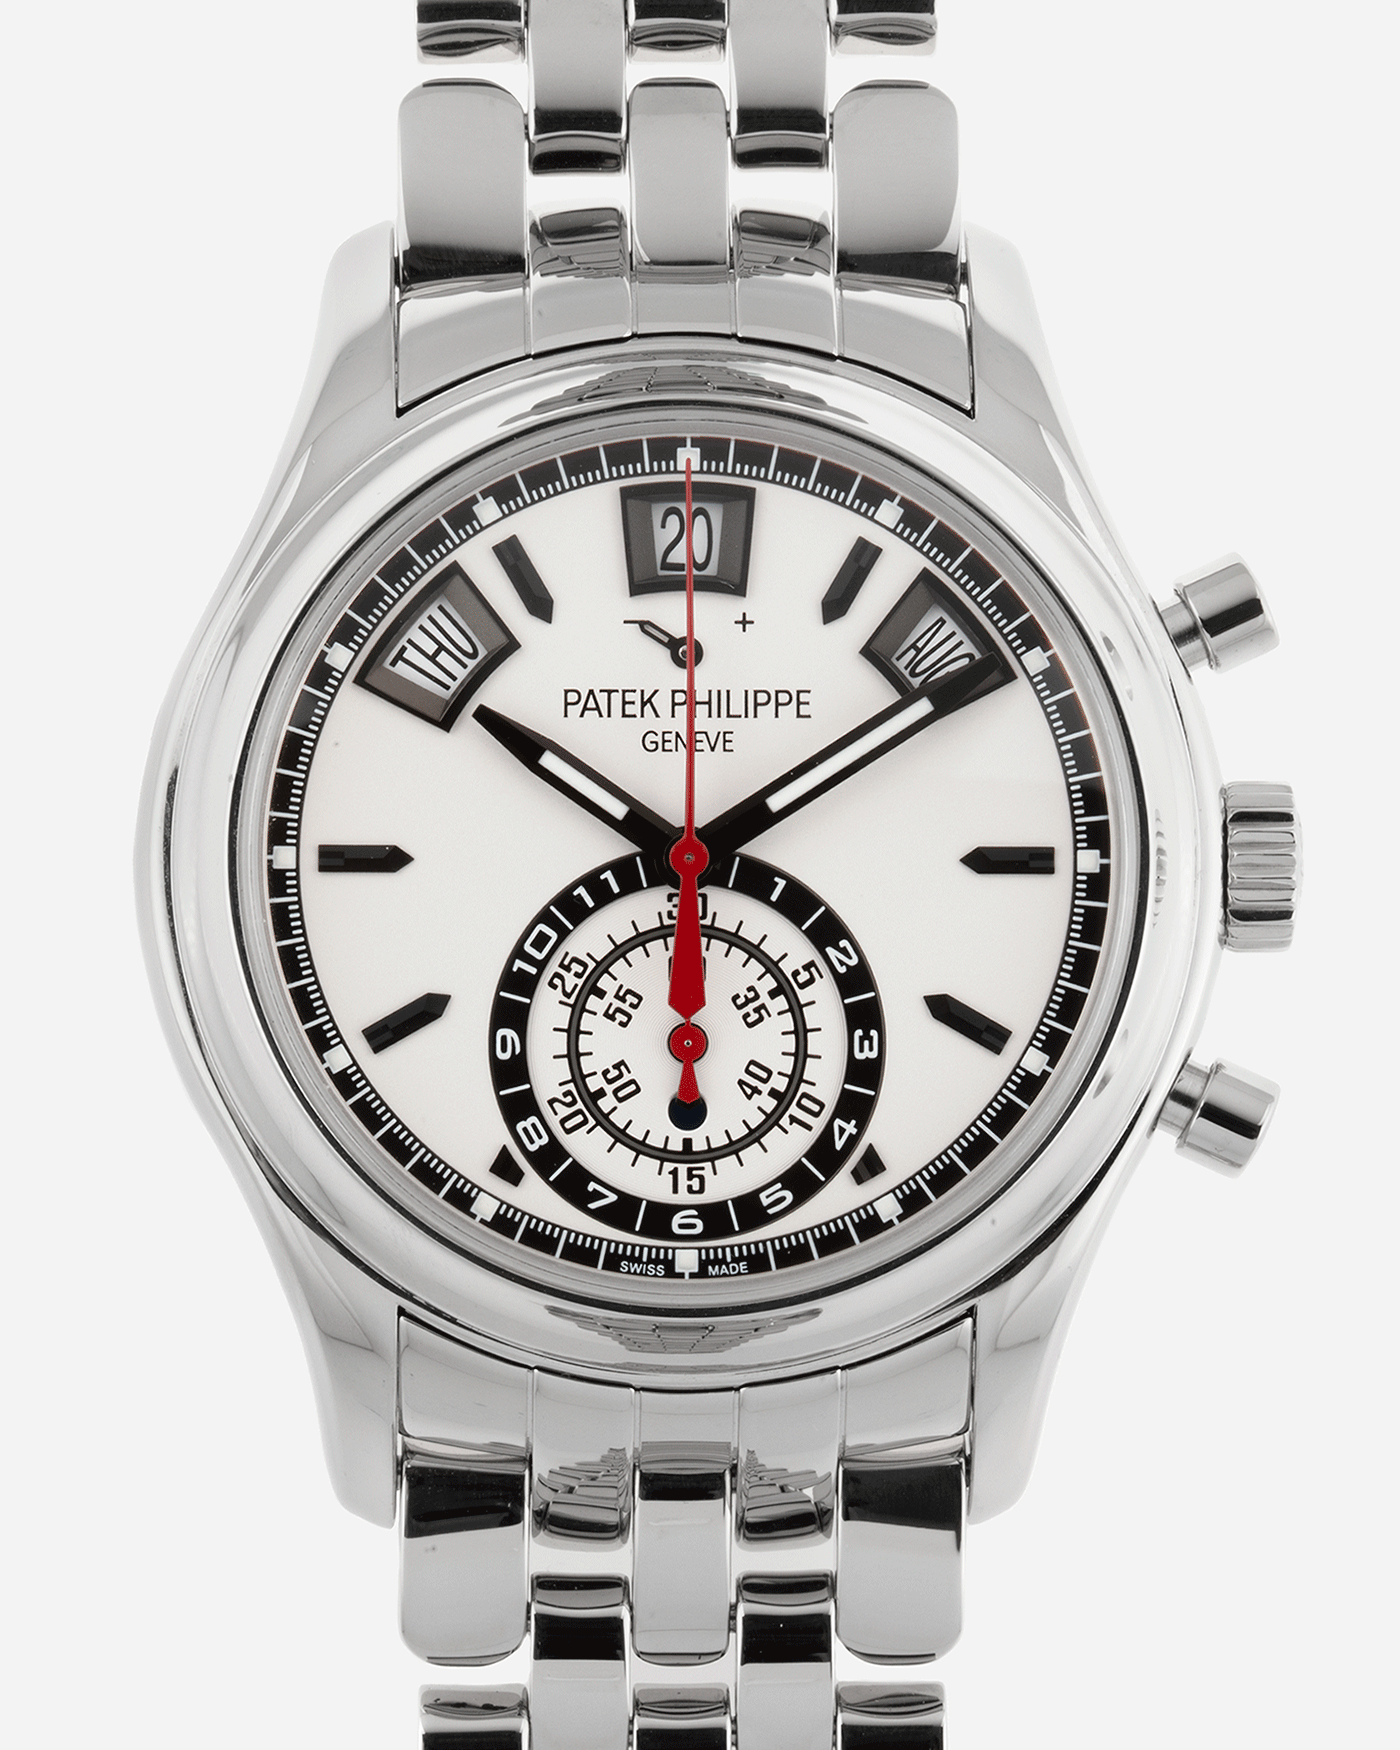 Patek Philippe 5960A Annual Calendar Chronograph Watch | S.Song Timepieces 